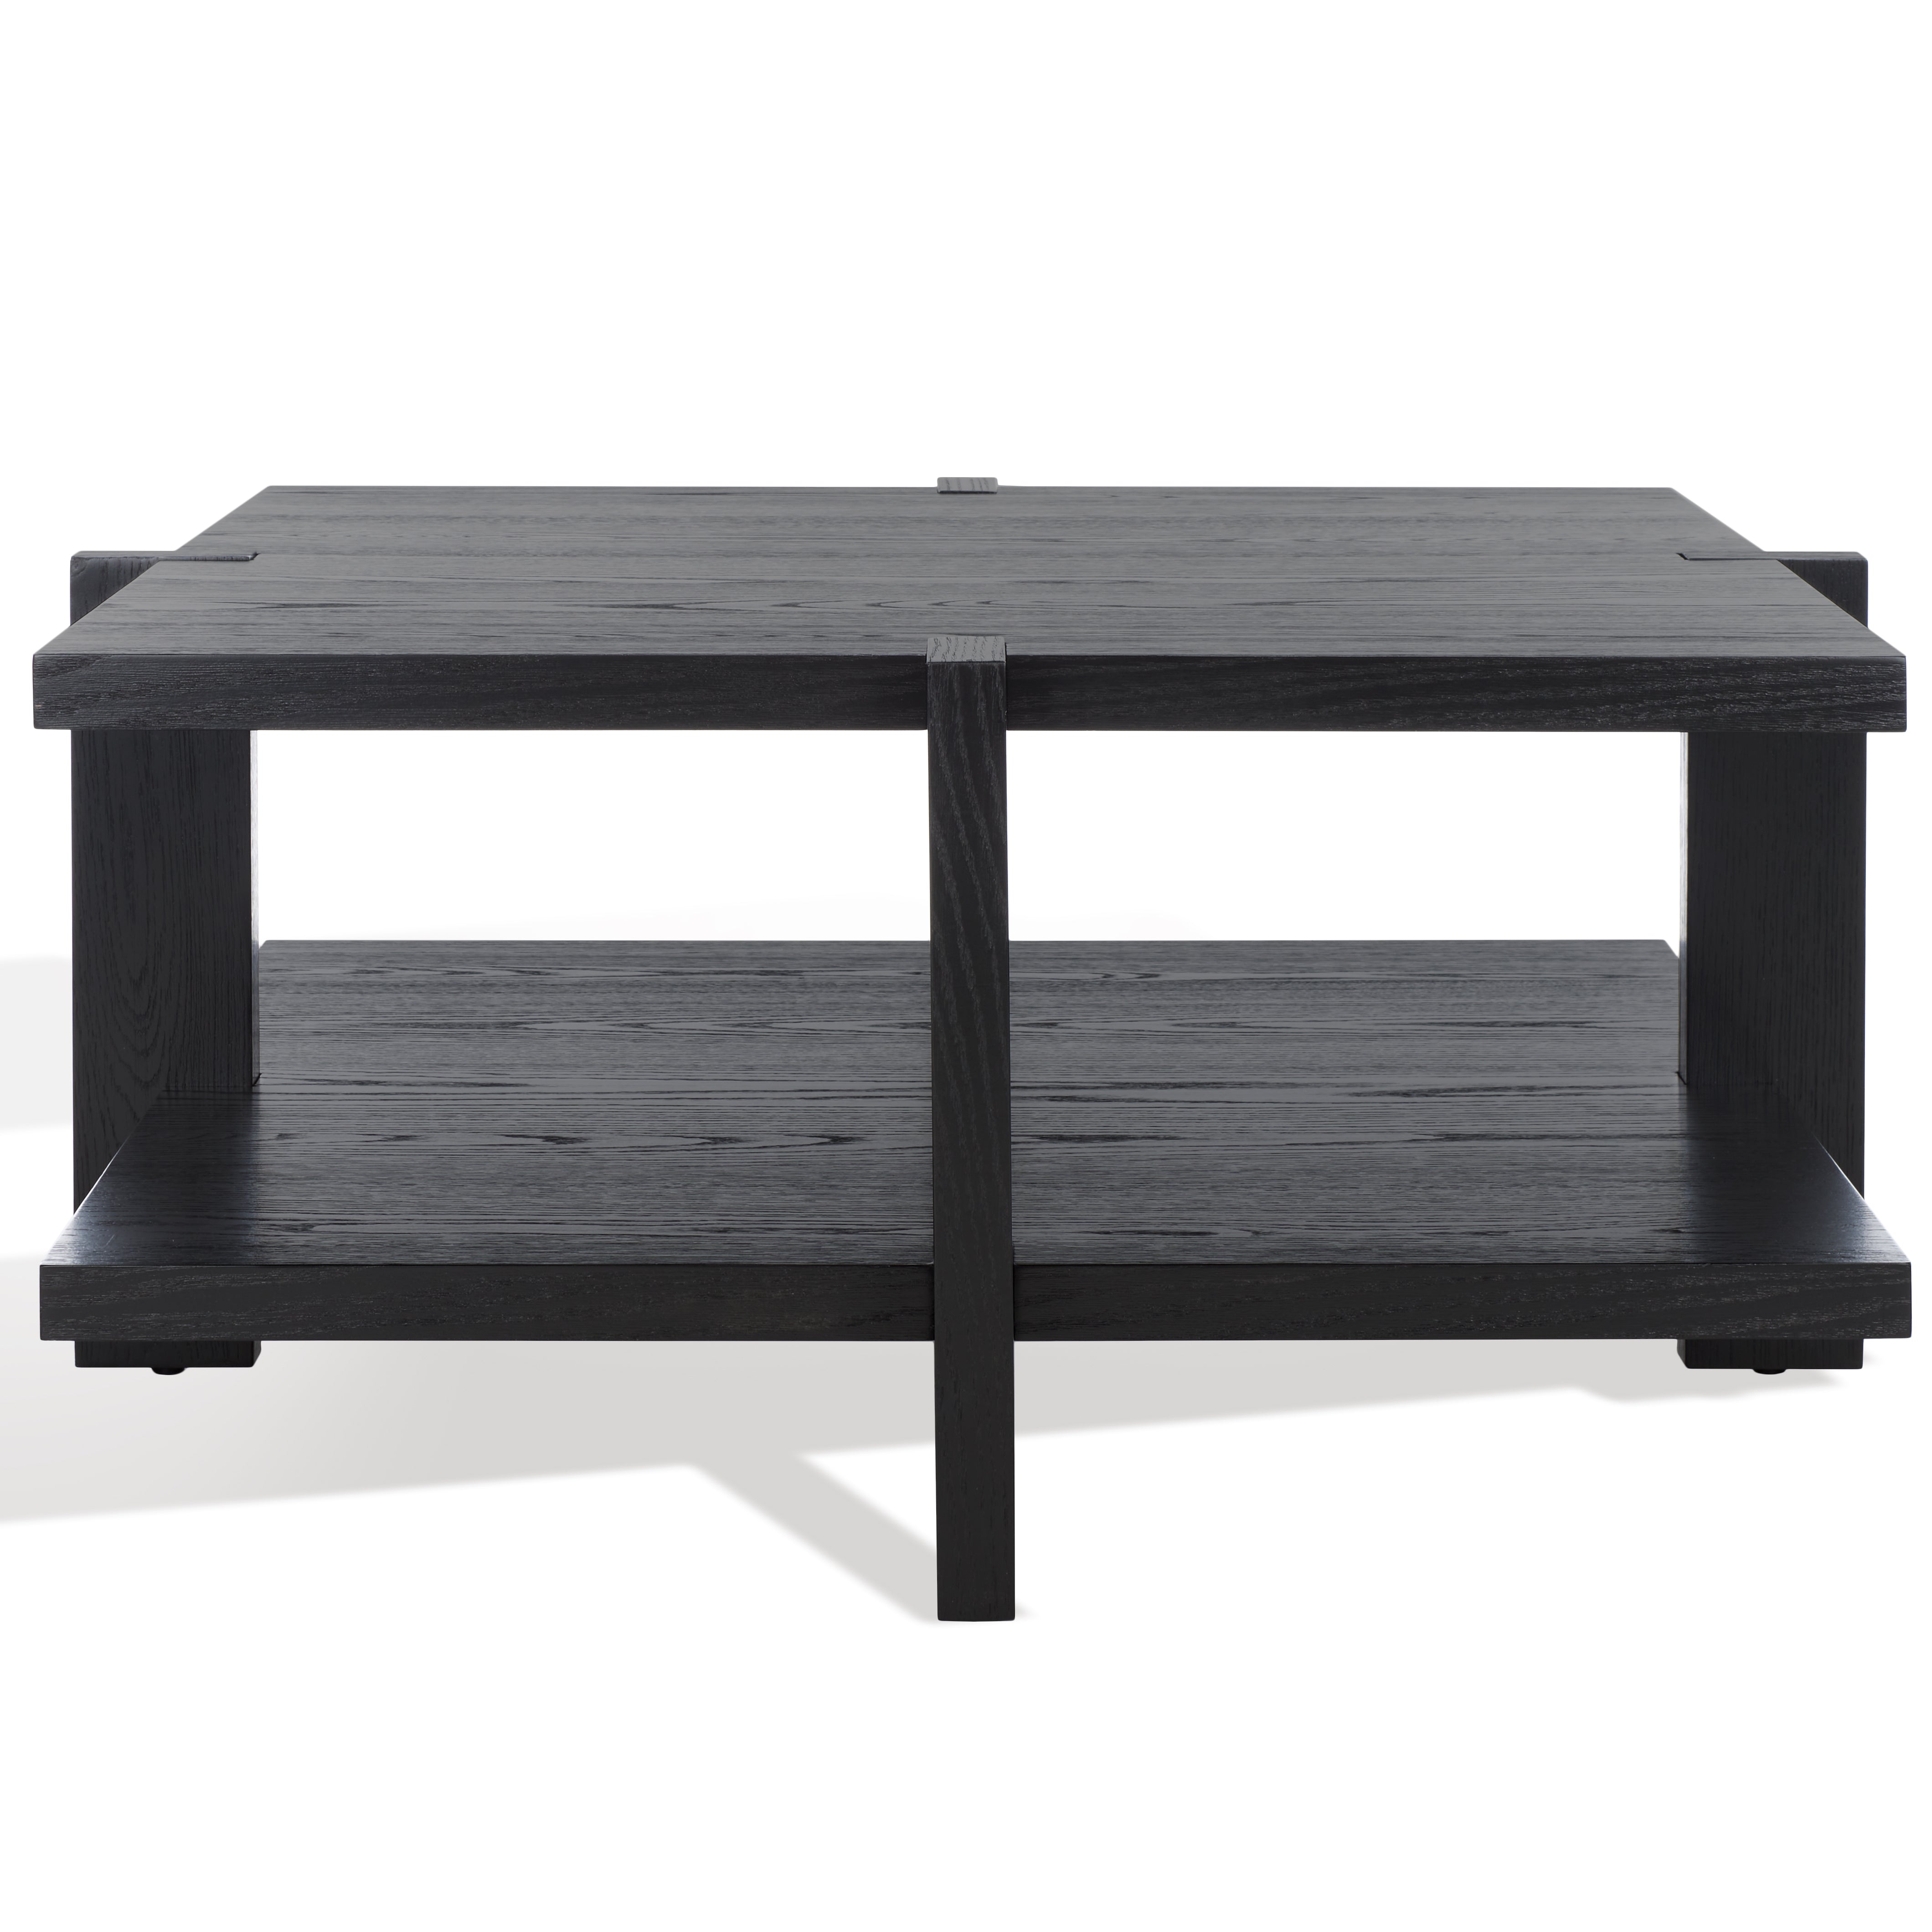 Safavieh Couture Quigley Square Wood Coffee Table, SFV2150 - Black